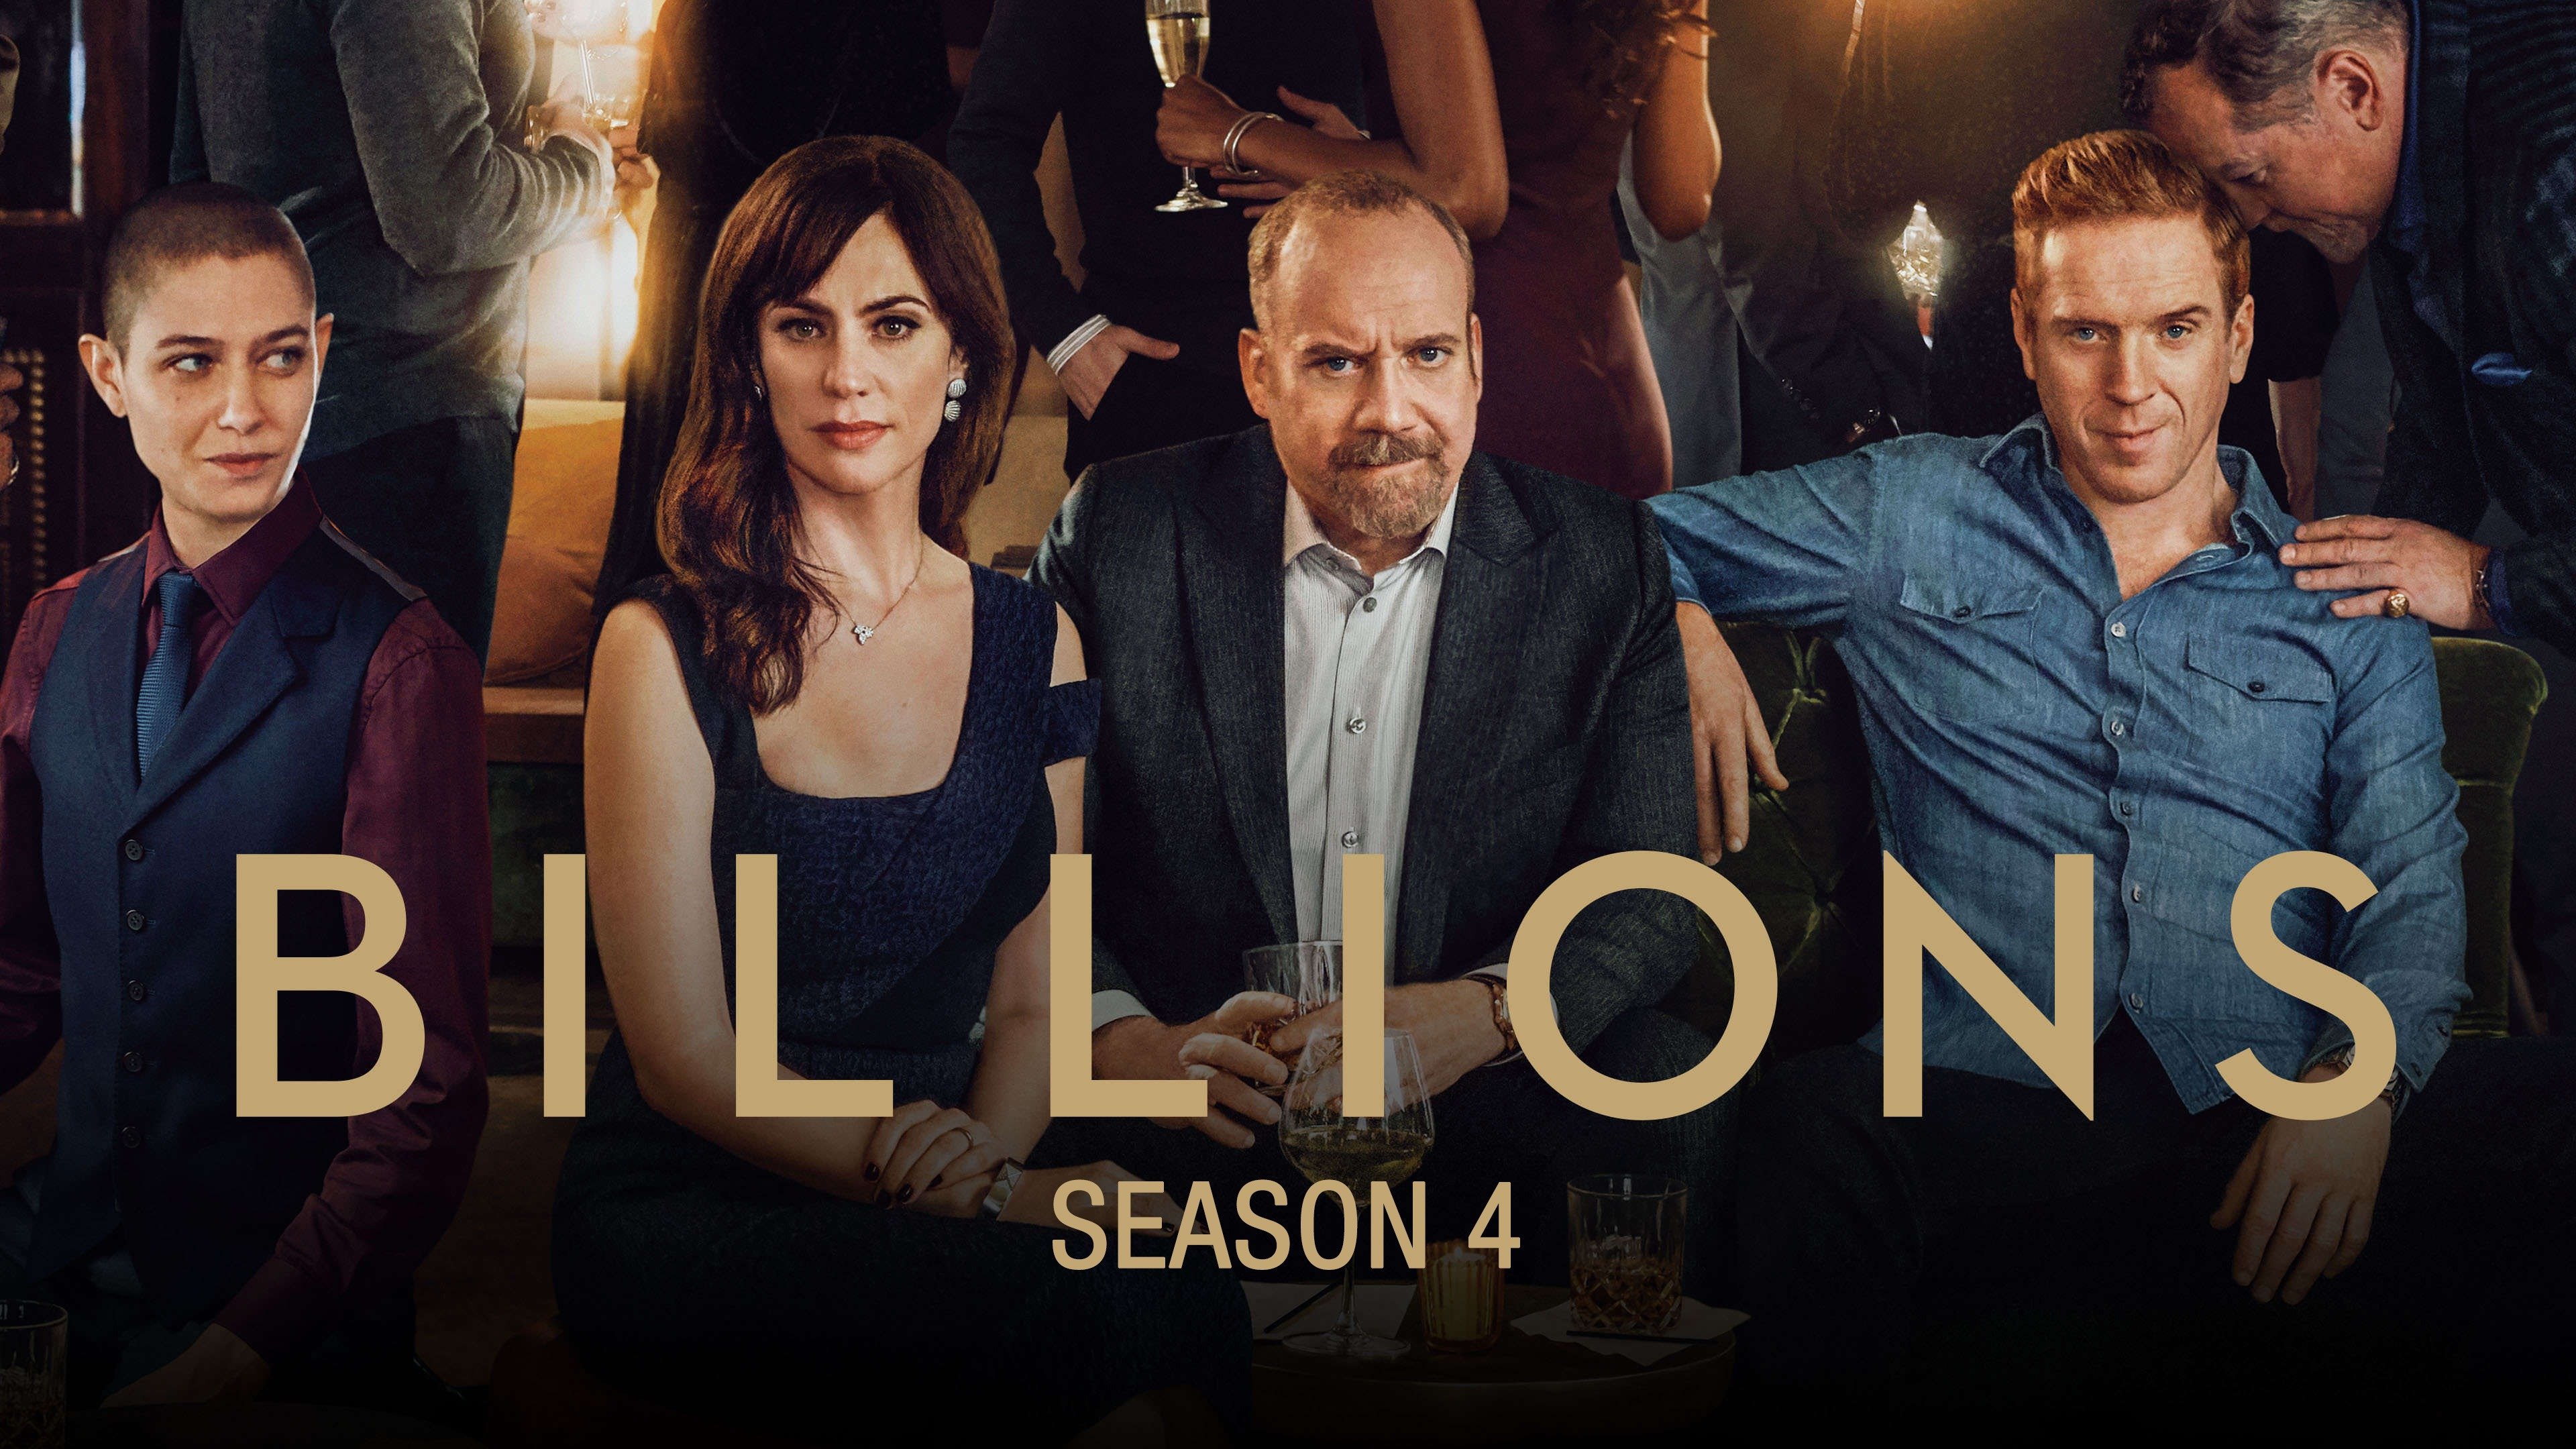 Billions Season 4 Episode 12 Sneak Peek There Must Be a Lever Out